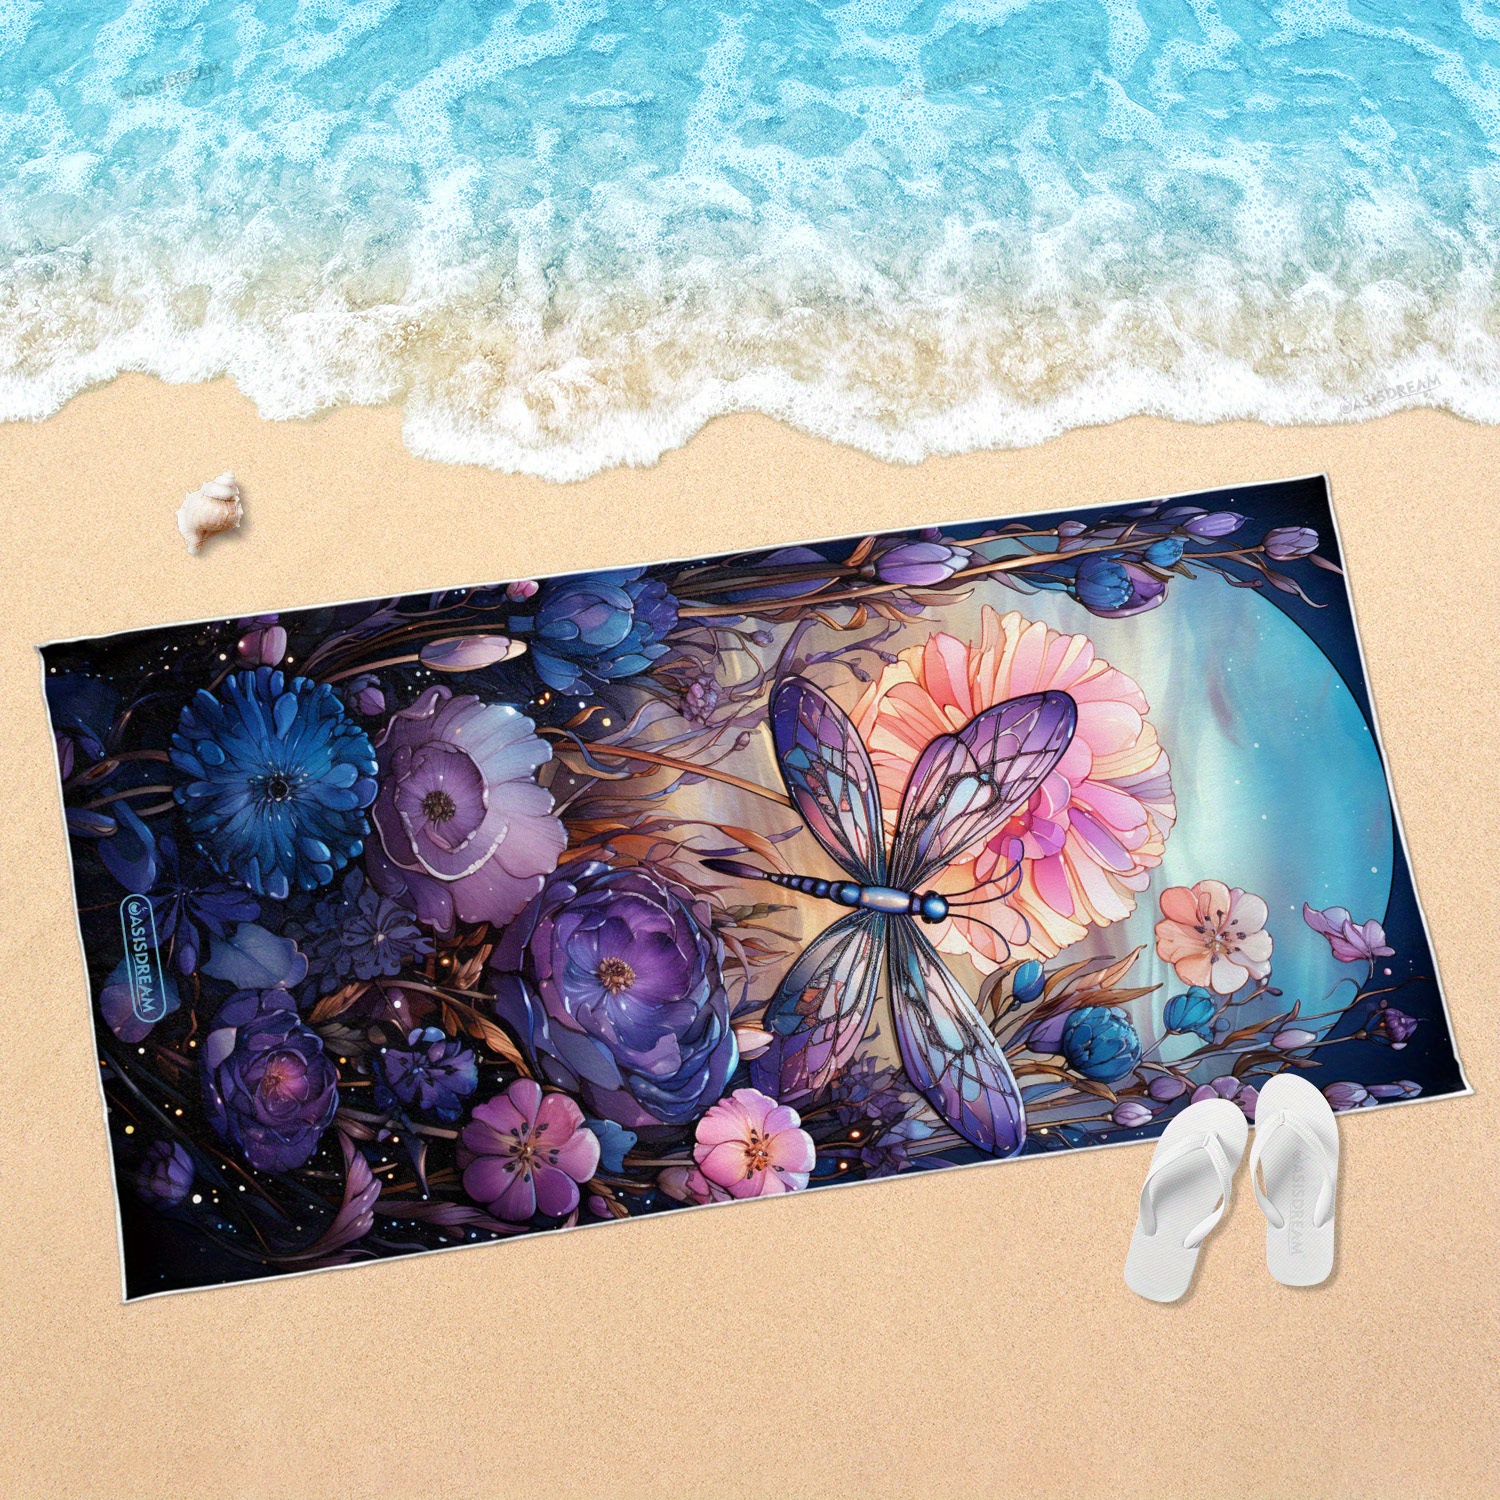 

1pc Dragonfly Flying In The Flower Beach Towel, Quick Drying Absorbent Beach Towel, Sandproof Beach Blanket, For Outdoor Travel Camping Beach Vacation, Beach Essentials (59"x 29.5"/150cmx75cm)